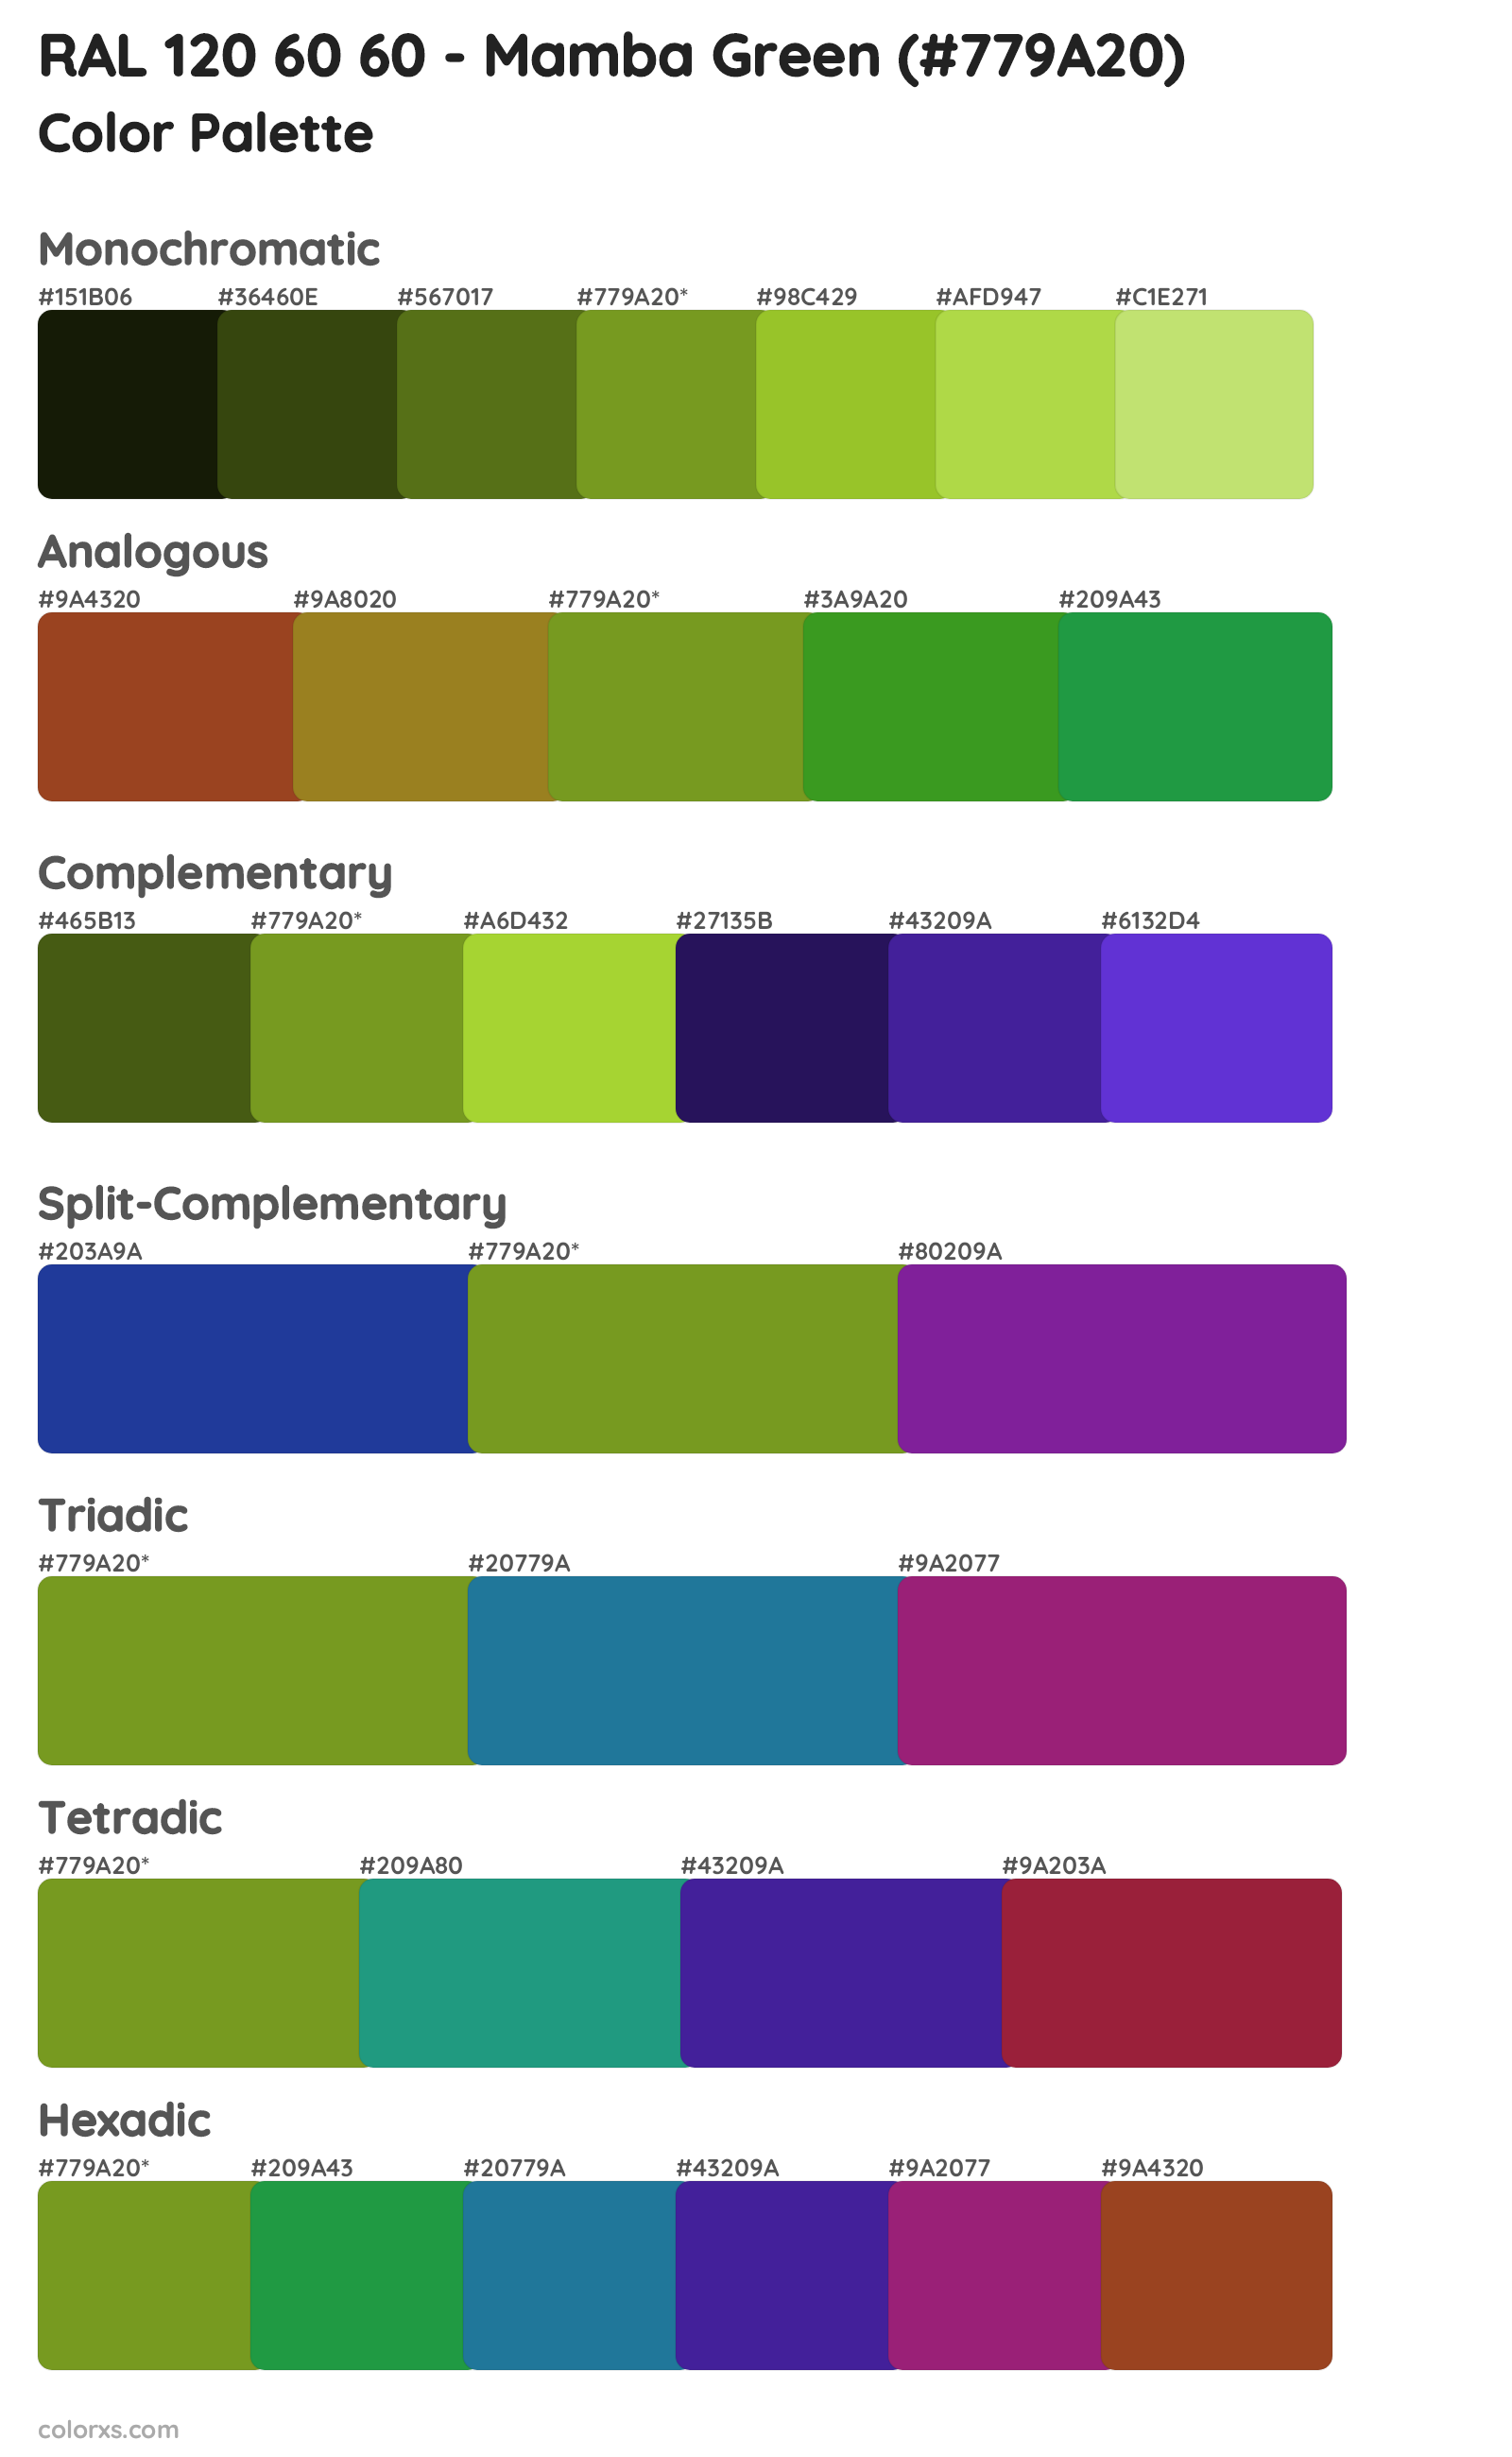 RAL 120 60 60 - Mamba Green Color Scheme Palettes